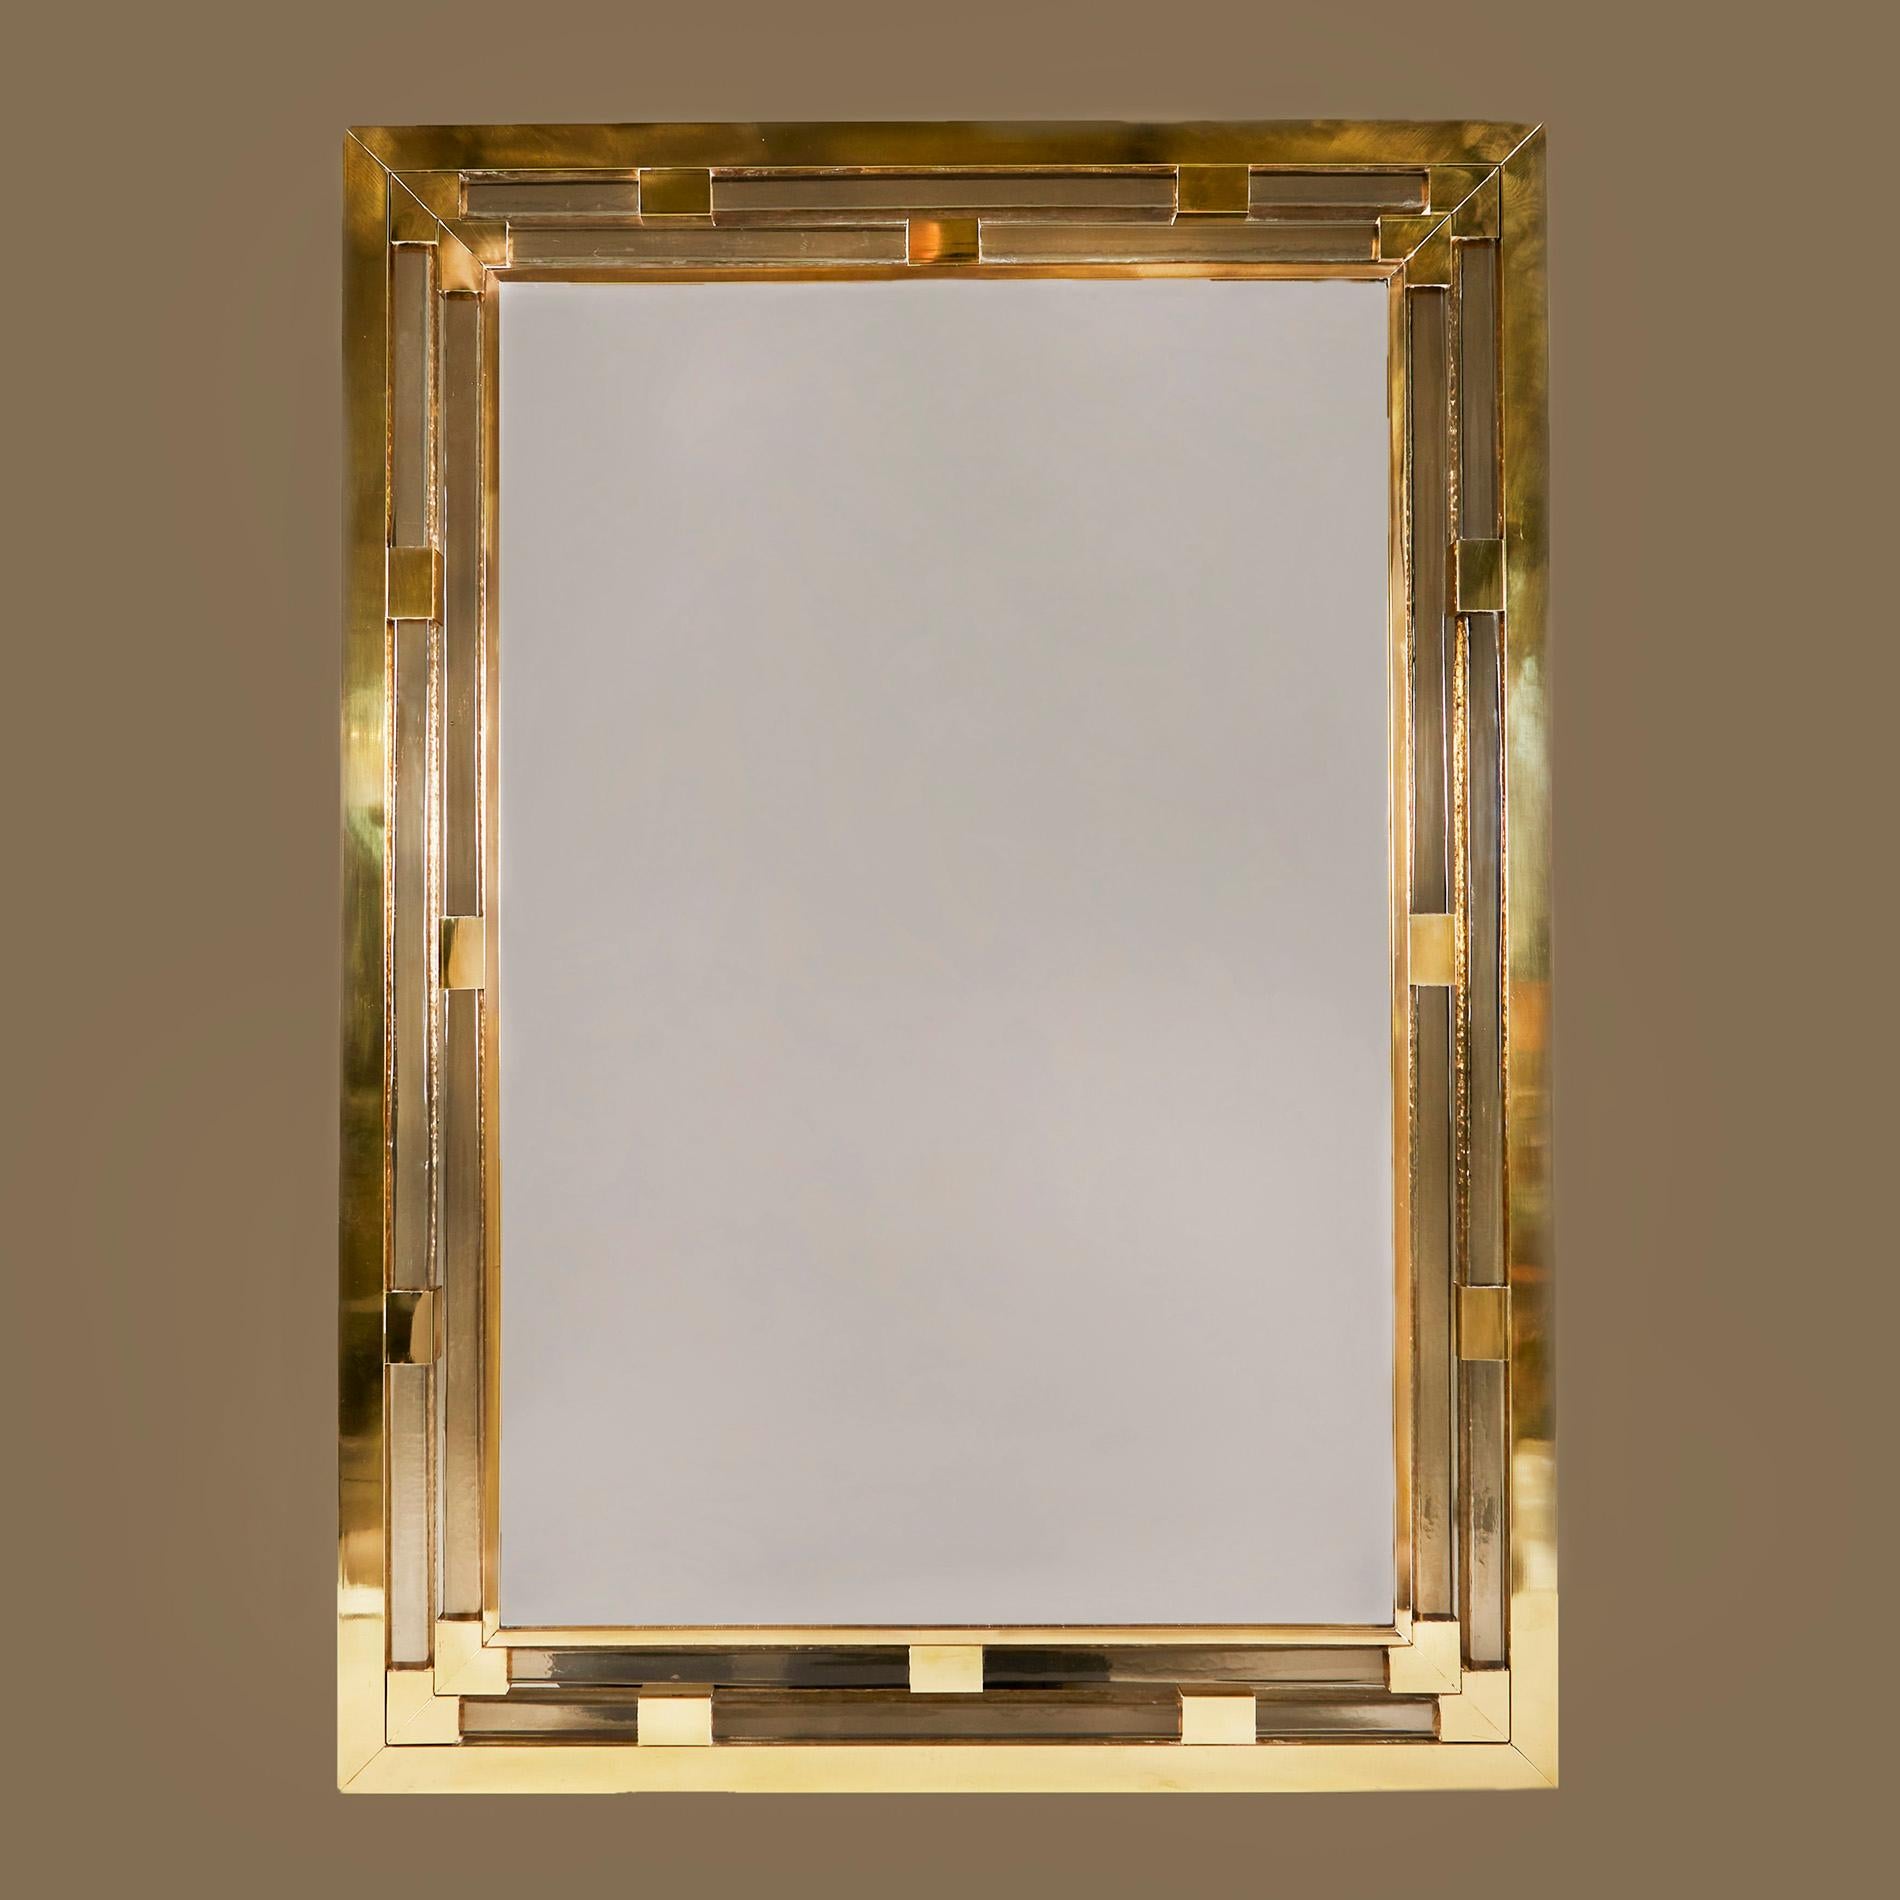 Substantial contemporary Italian rectangular mirror in a midcentury Italian style. The triple brass frame is interspersed with two chunky layers of Murano square glass in a subtle champagne shade. The design incorporates brass corners and brass